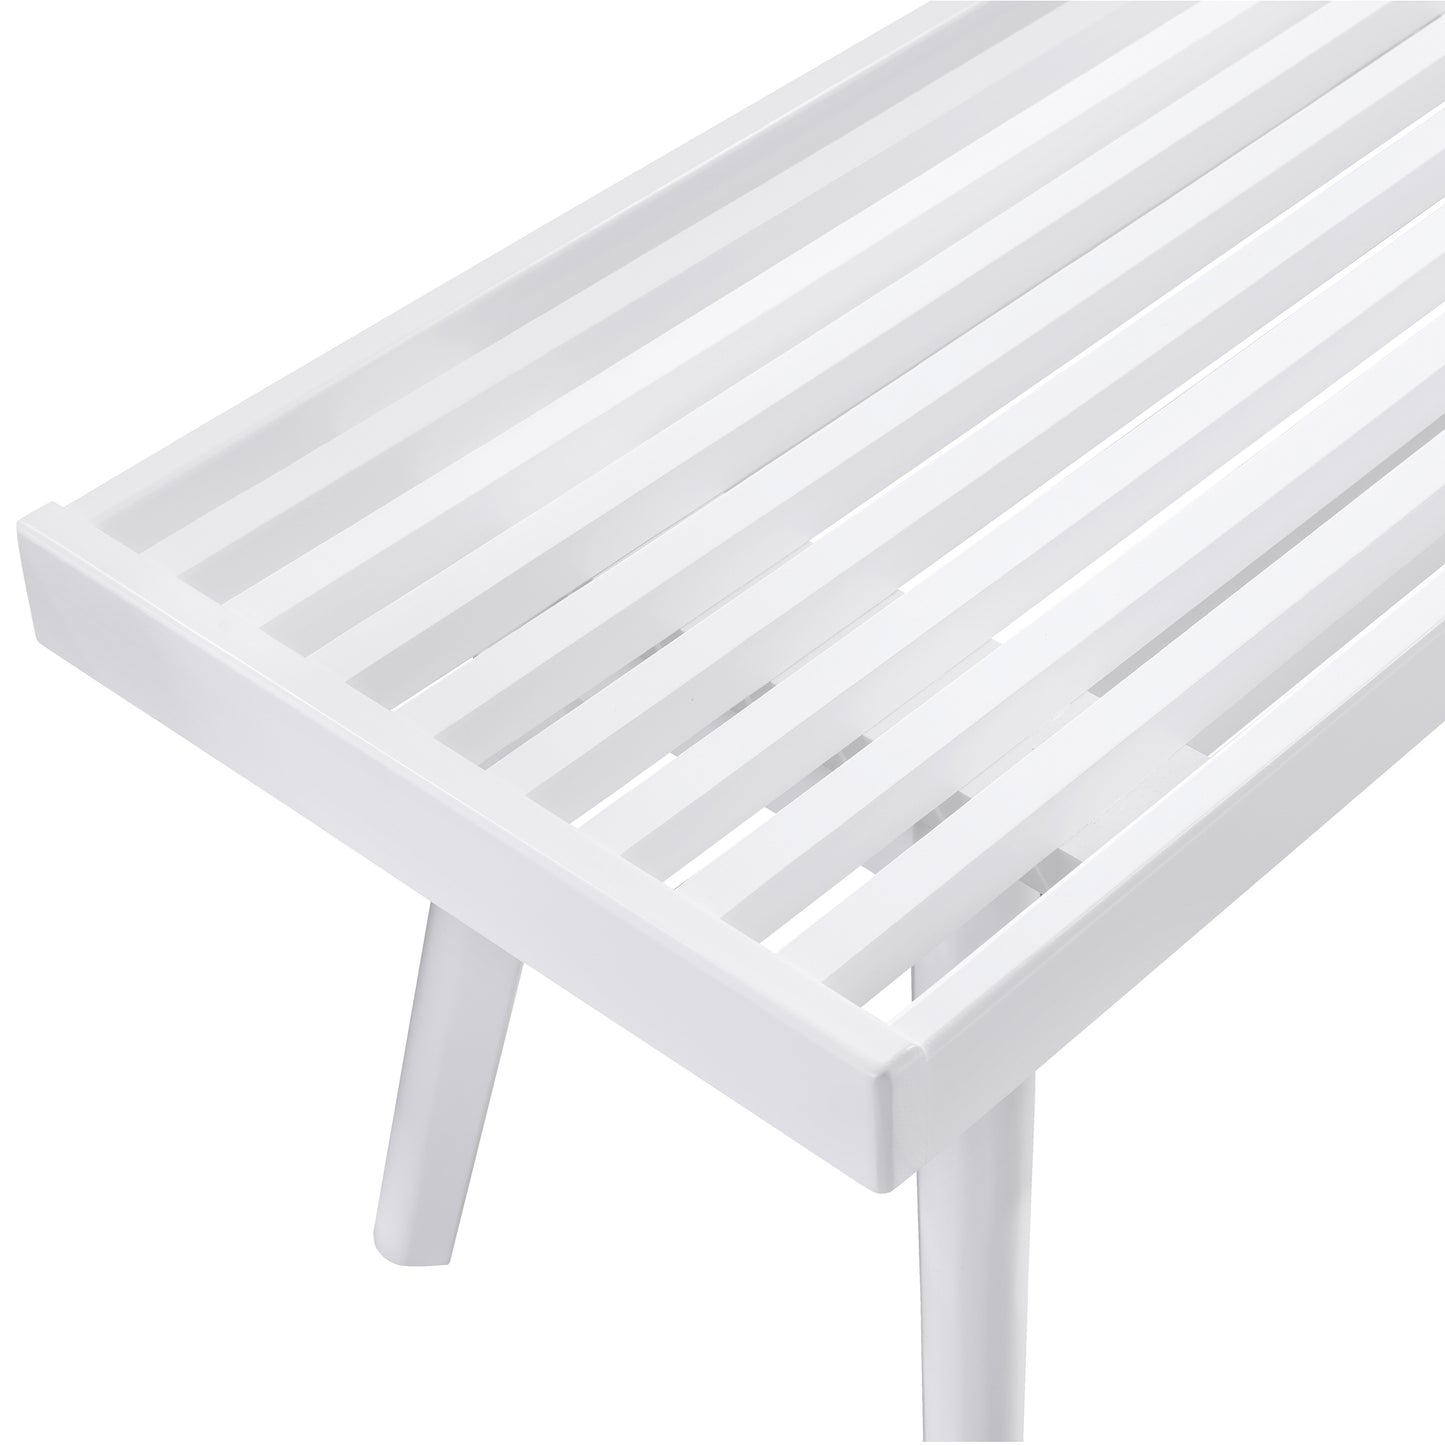 Roundhill Furniture Larwich Solid Wood Slatted Bench, 56.30-Inch Long, White